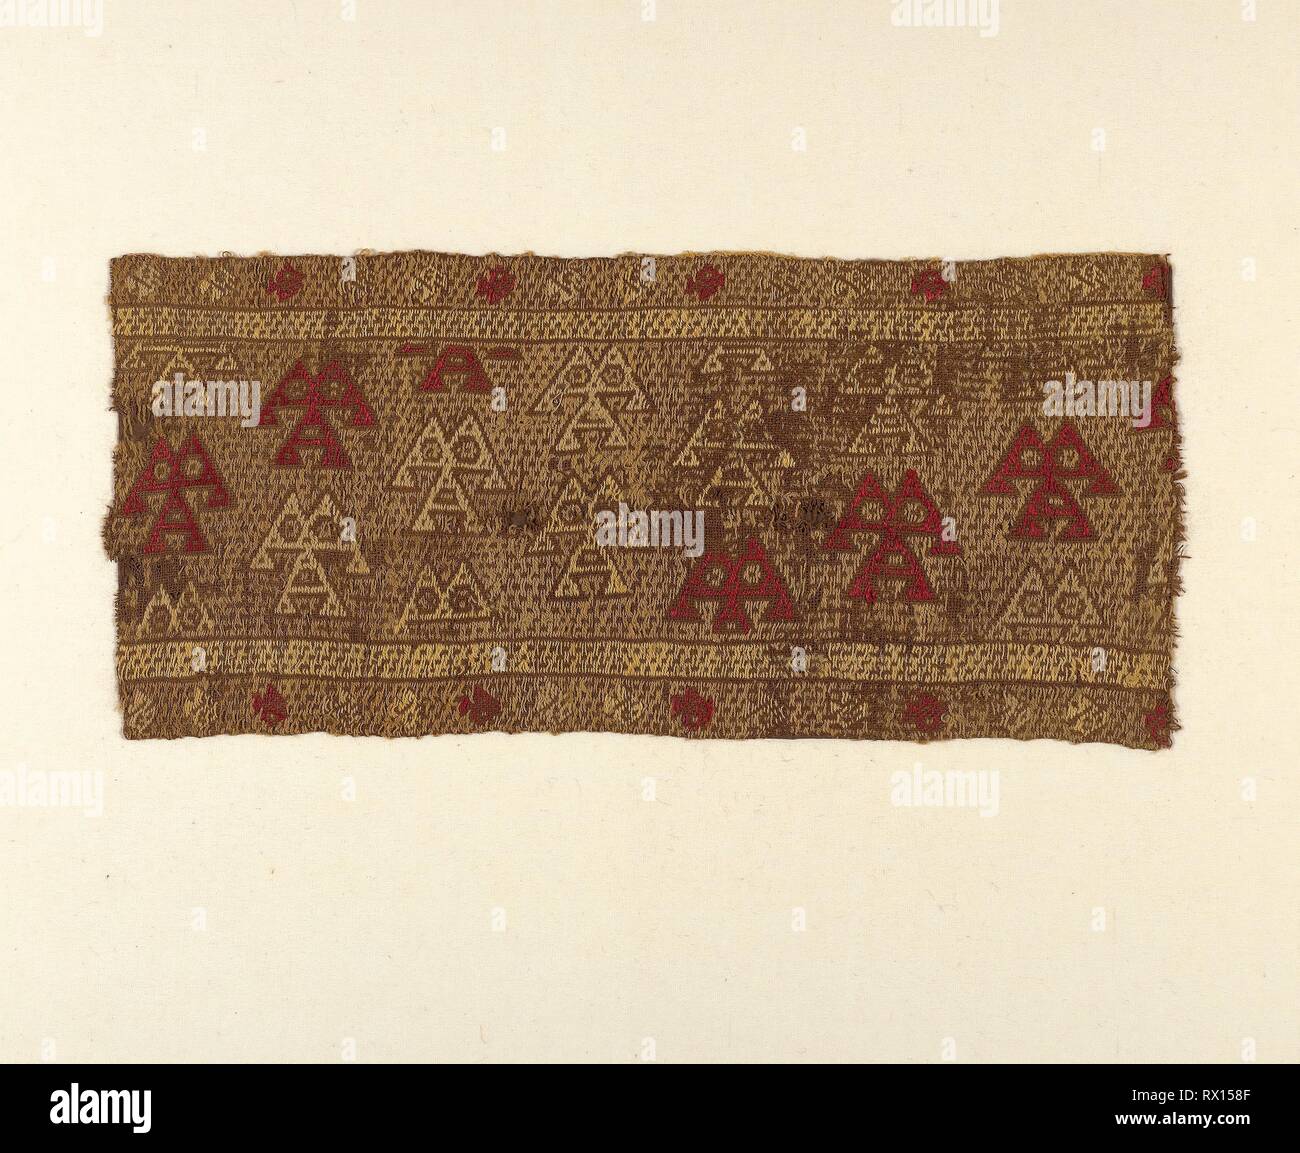 Fragment. Chancay; Peru, Central coast. Date: 1000-1476. Dimensions: 44.8 x 20.3 cm (17 5/8 x 8 in.). Cotton and wool (camelid), plain weave with patterning and brocading wefts. Origin: Peru. Museum: The Chicago Art Institute. Stock Photo